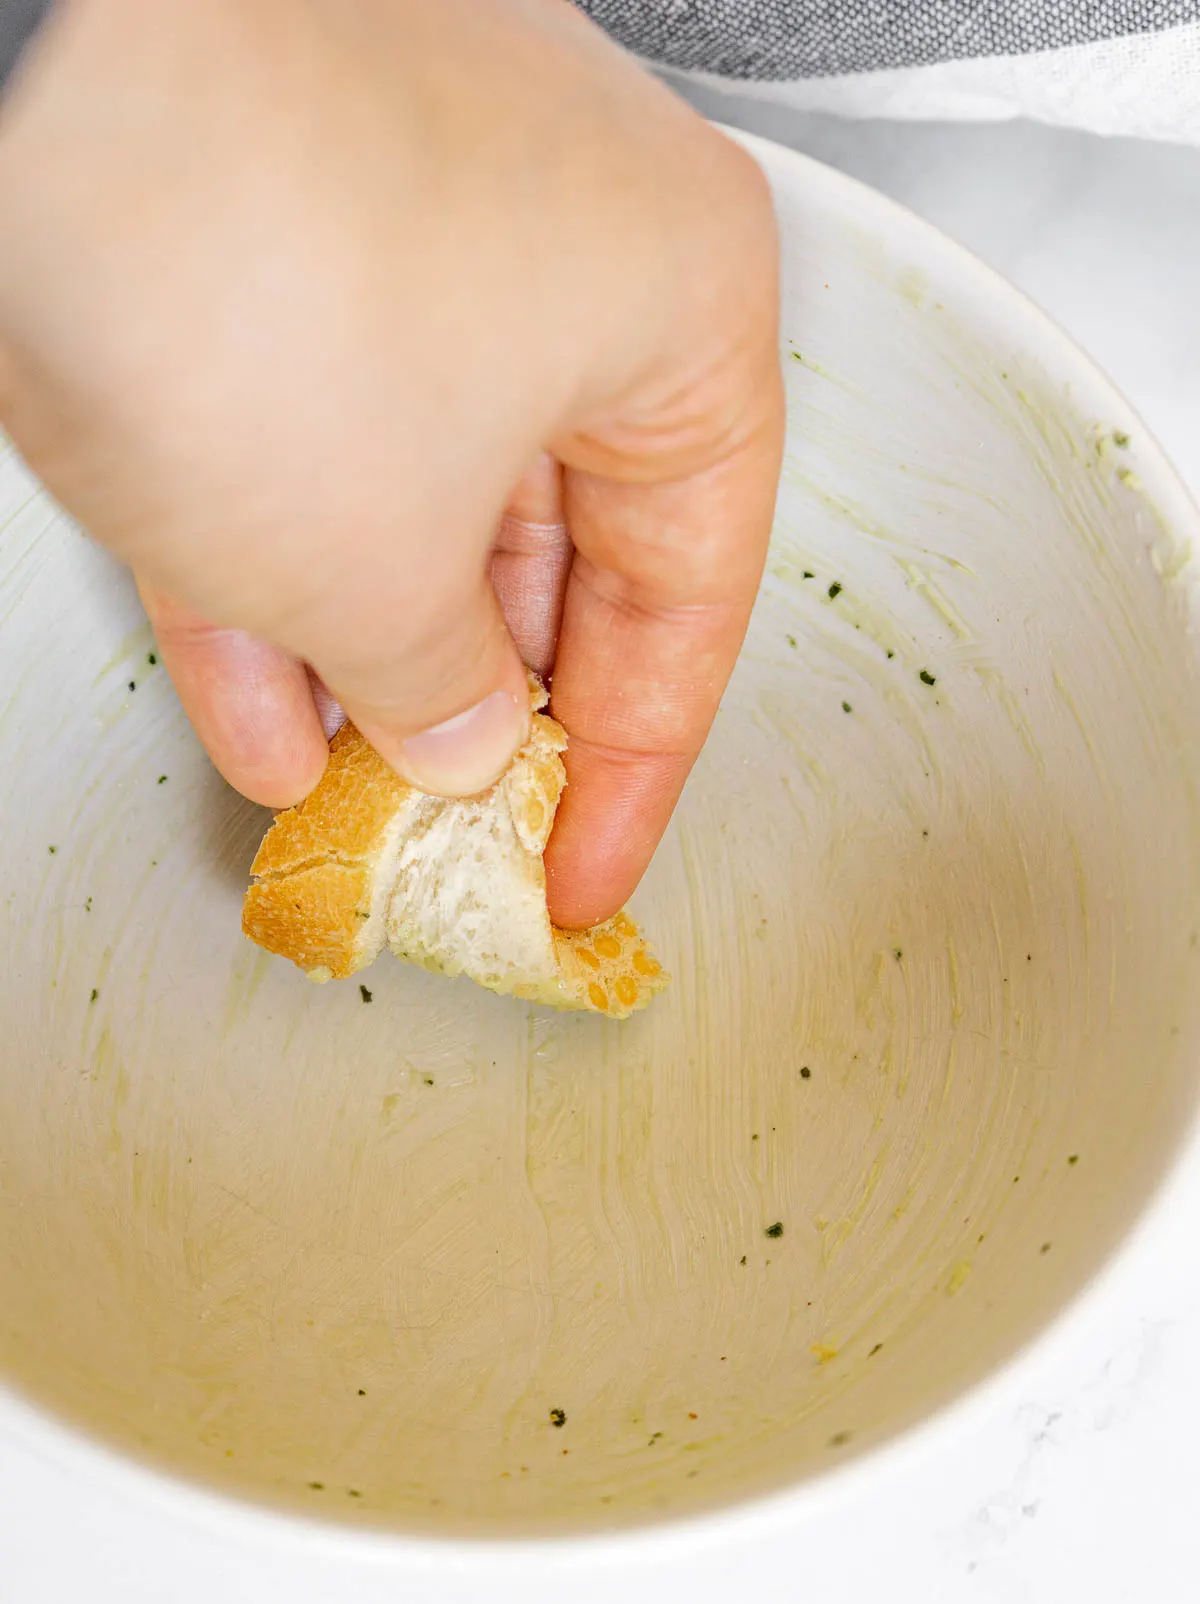 Using bread to wipe a bowl of pesto butter clean